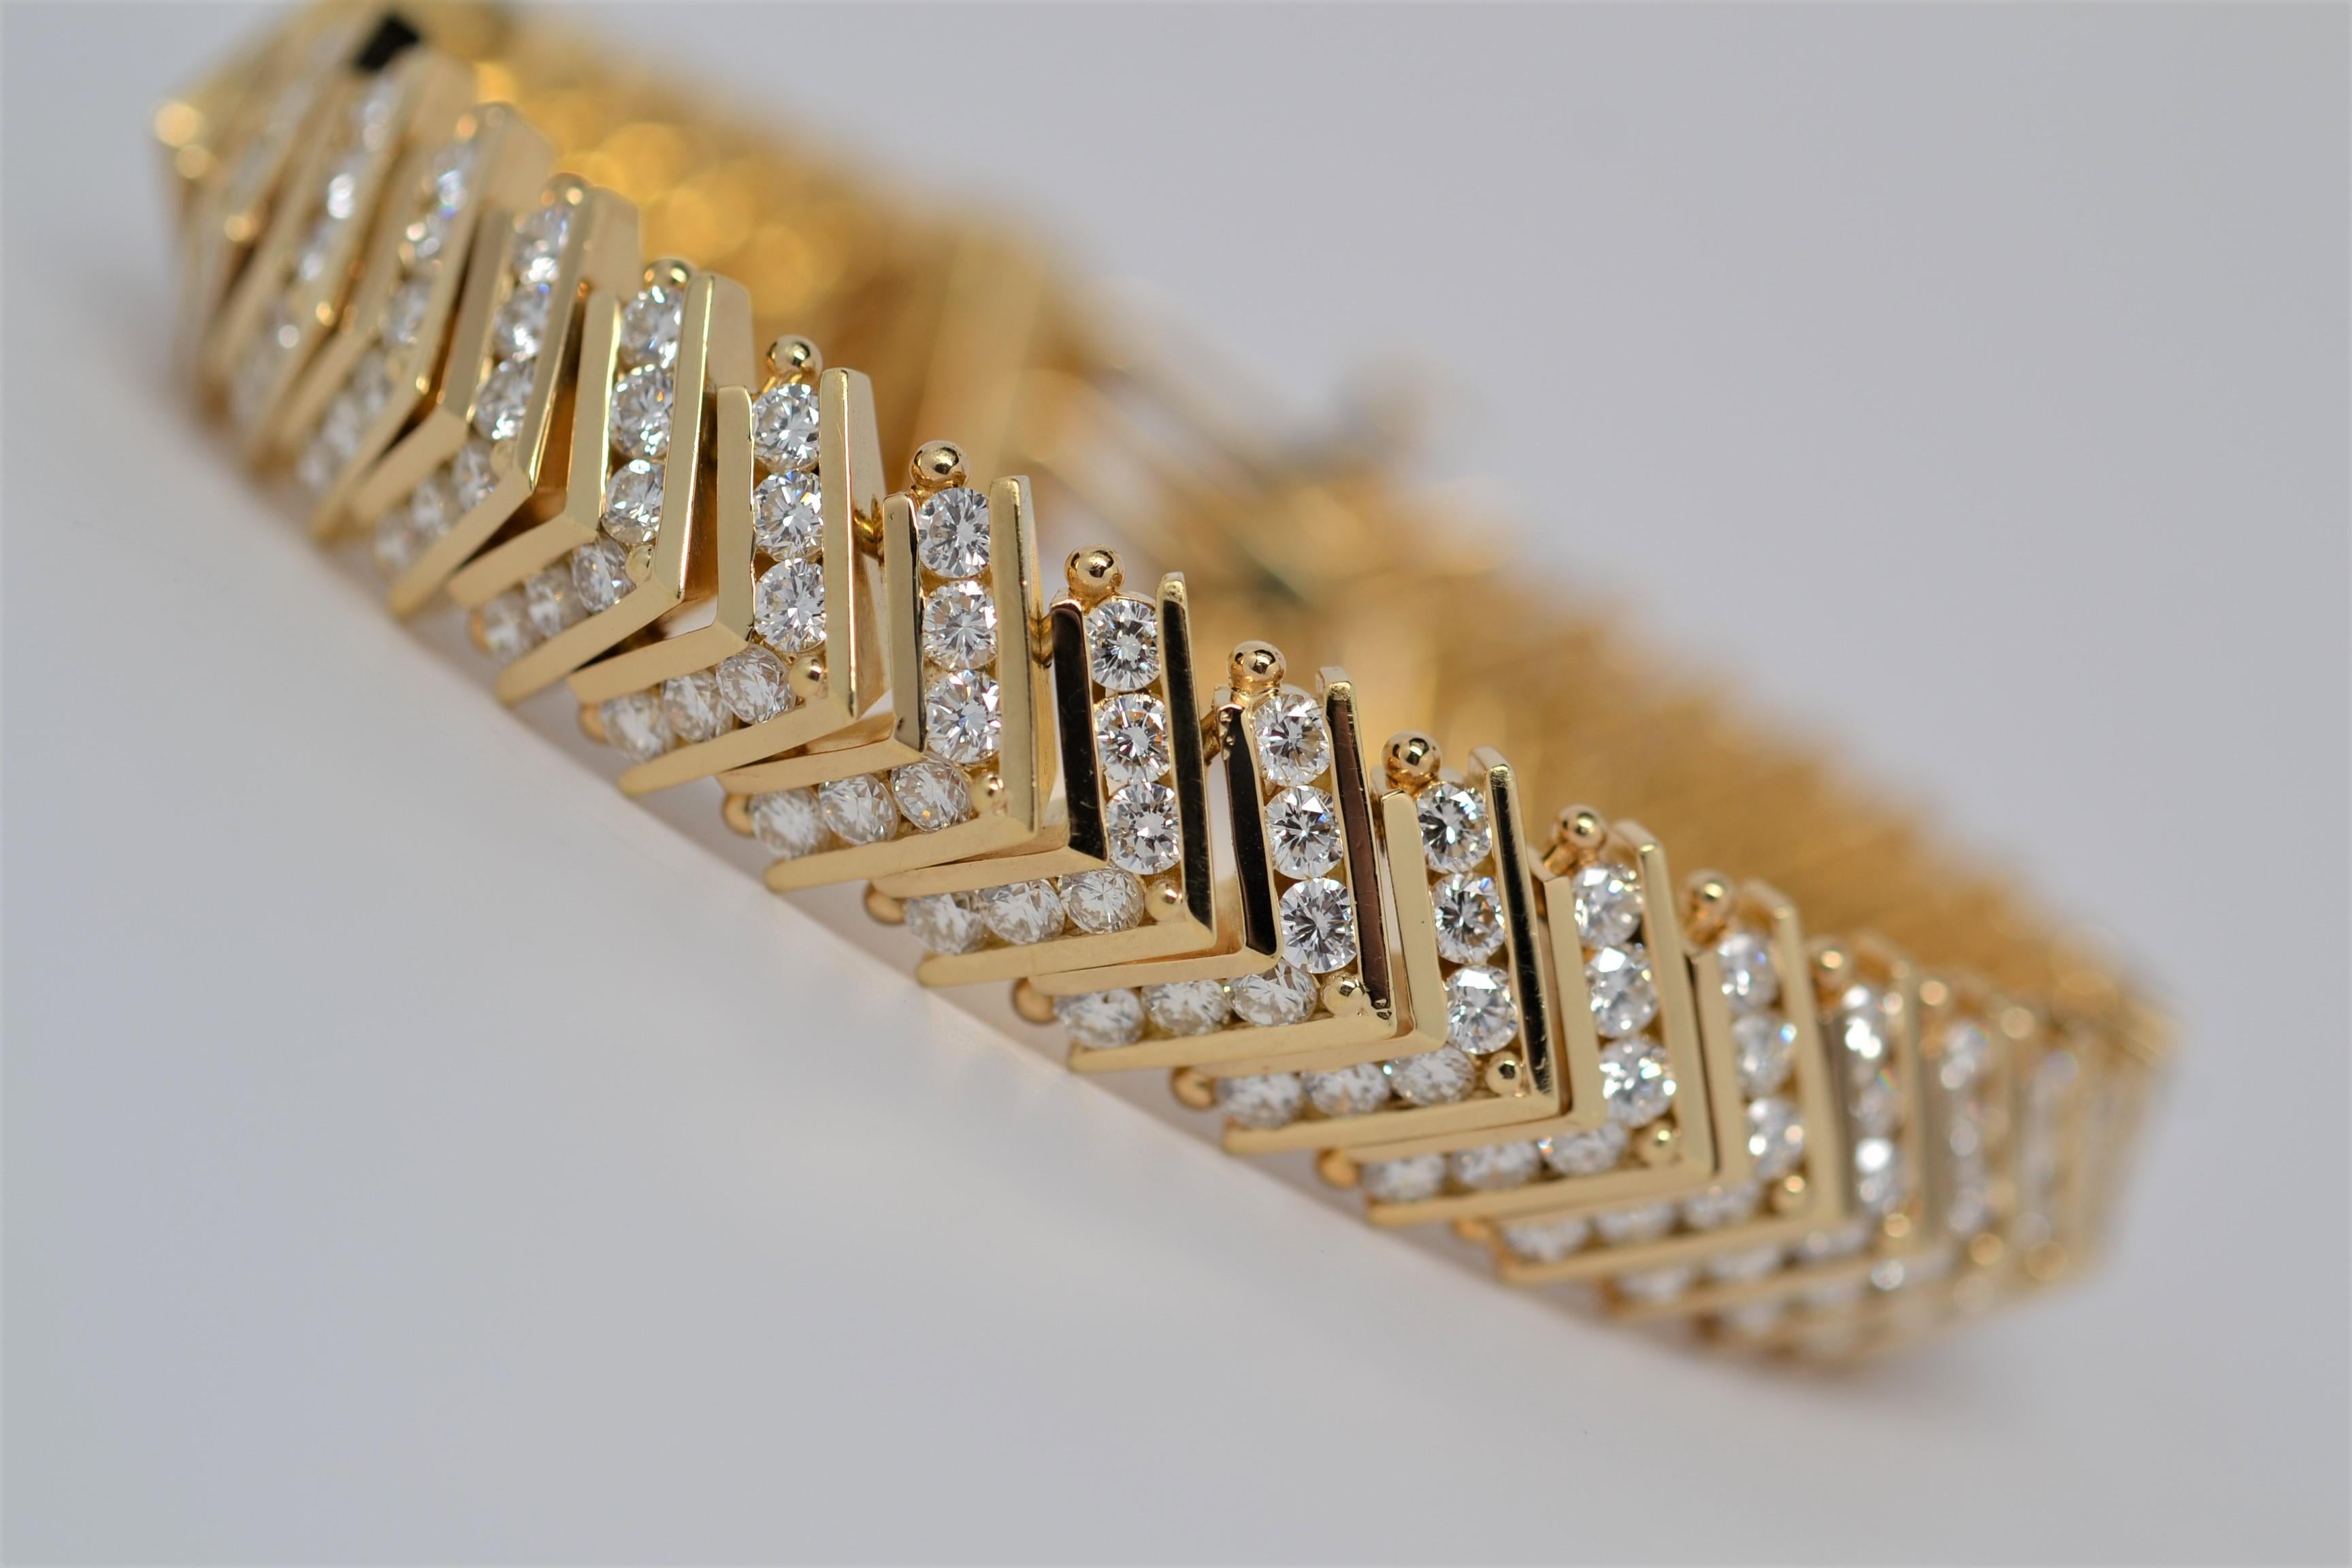 A handmade ladies 18K Yellow Gold bracelet with multi link Chevron layout. Each link is set with diamonds using a channel in the Chevron and a shared bead for the center. A total of two hundred and twenty two Round Brilliant Cut Diamonds weighing